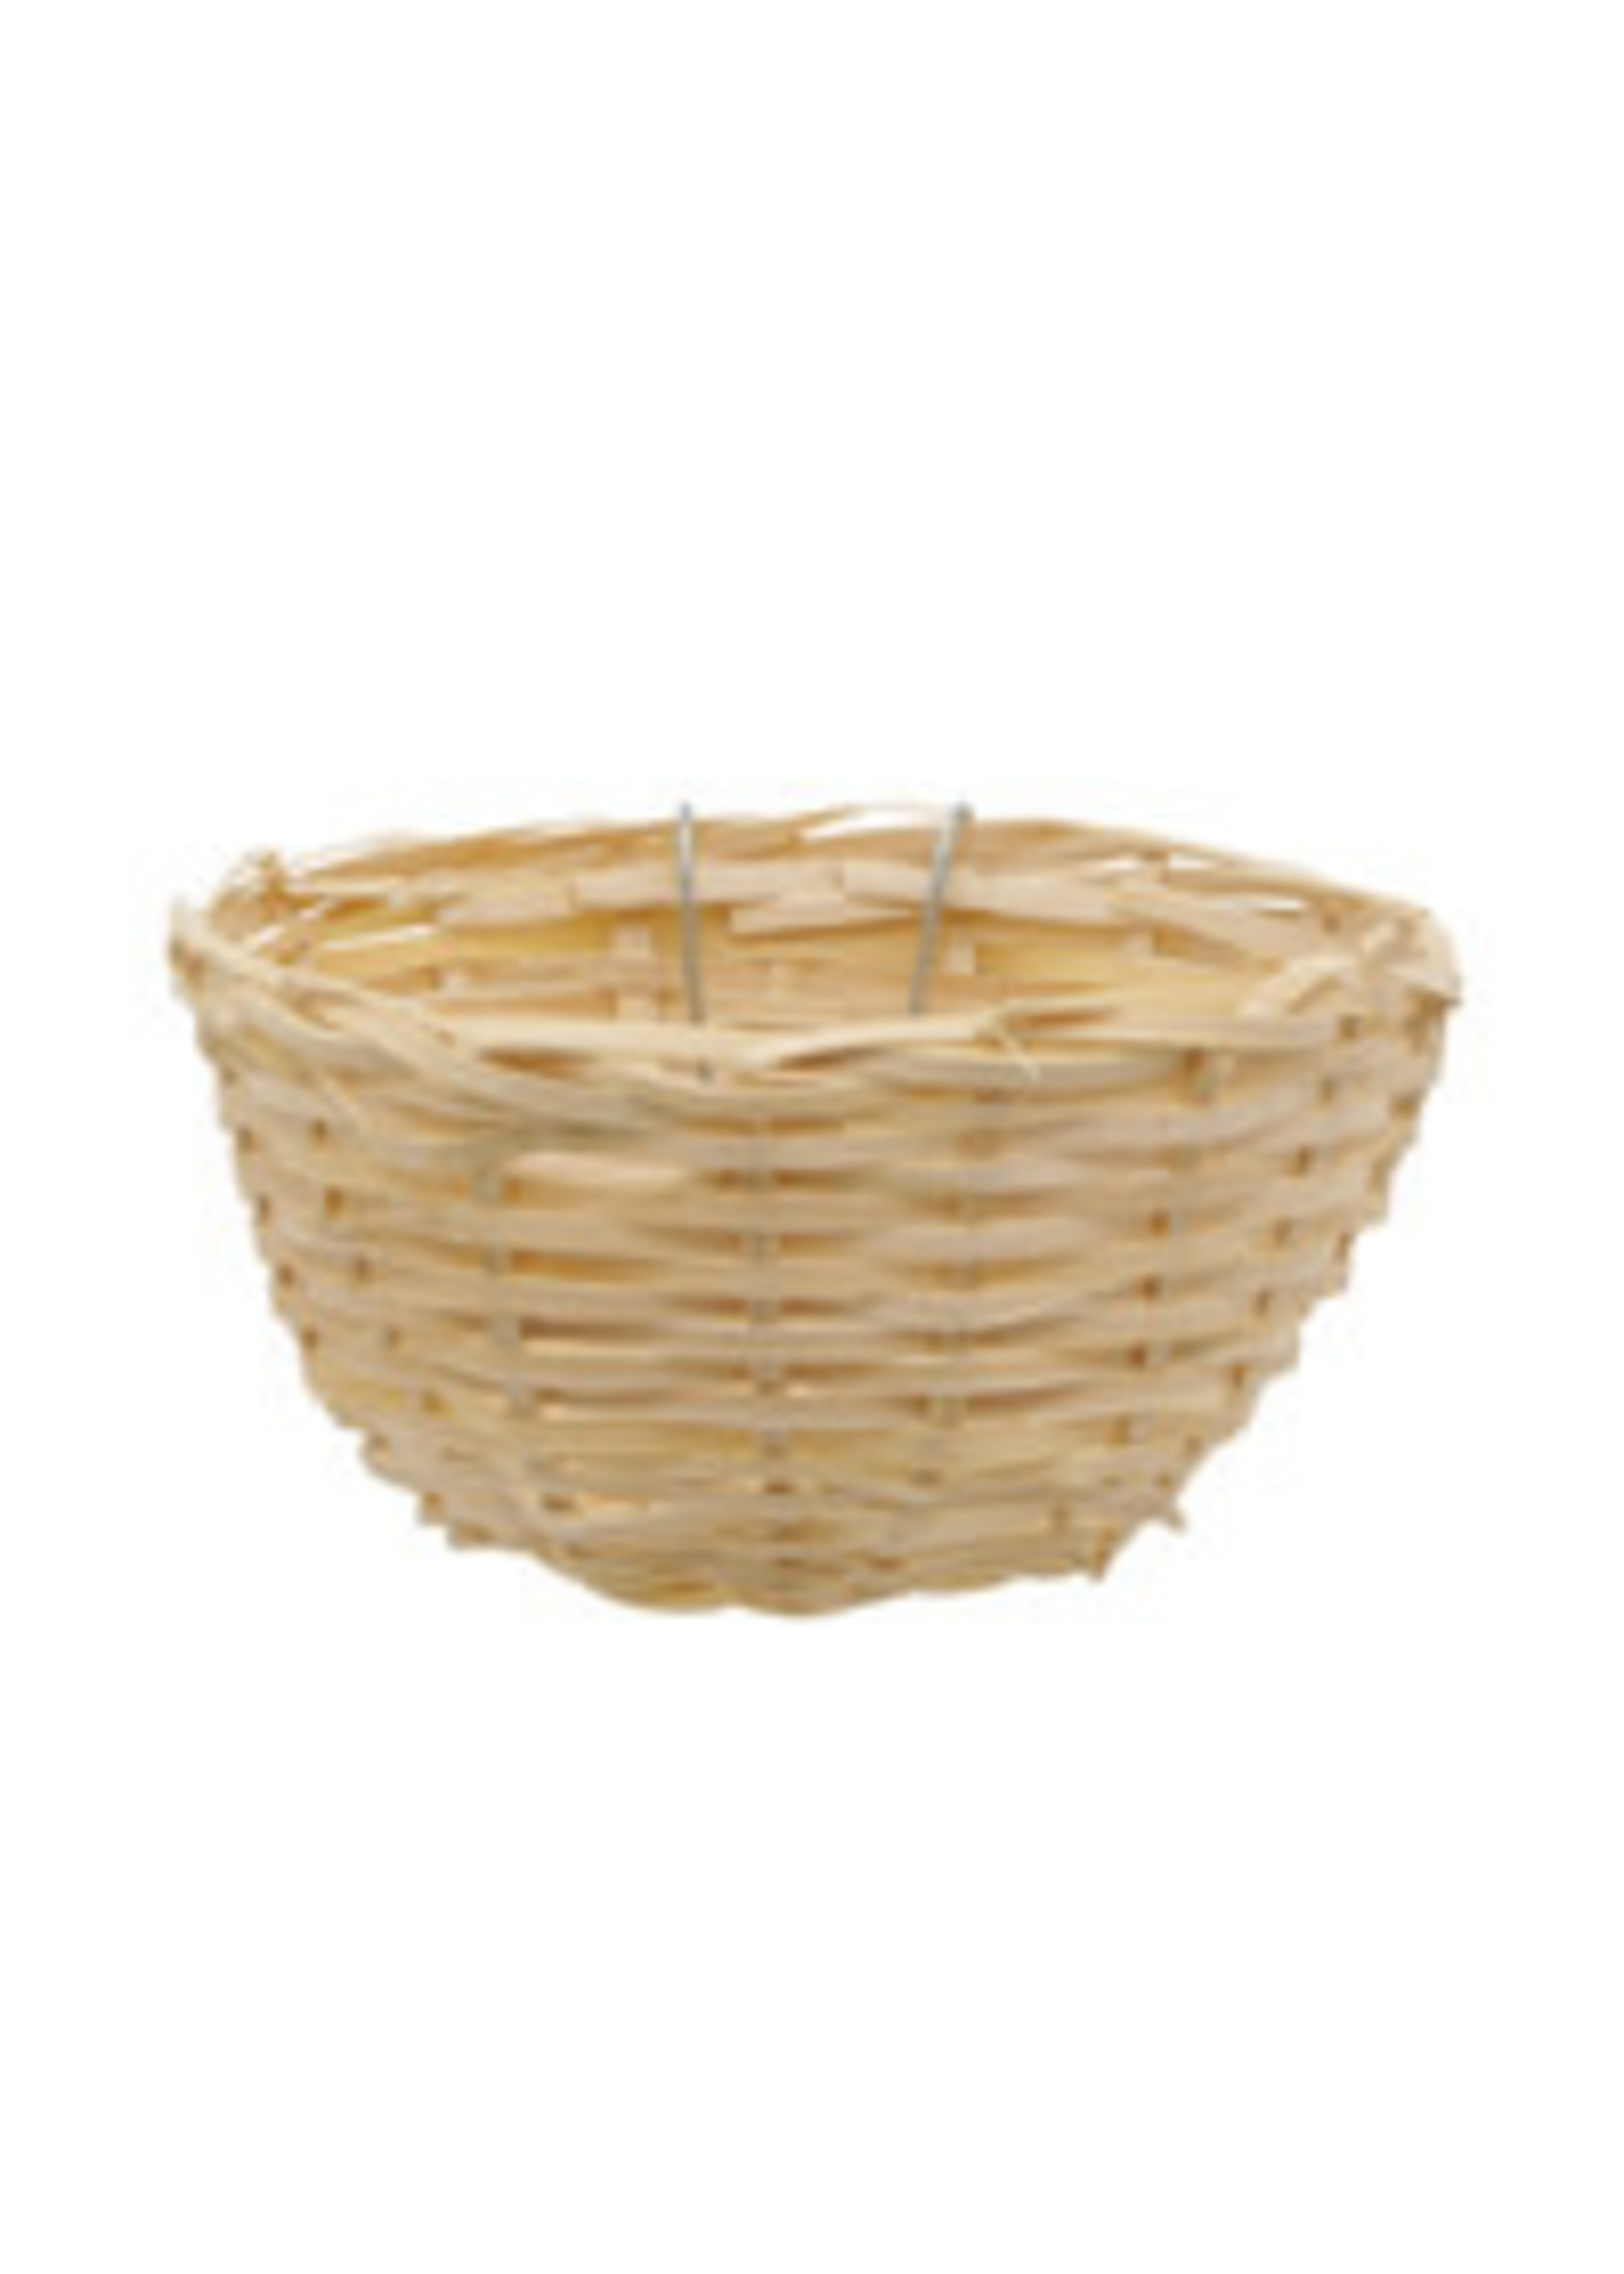 Living World Hagen Living World Bamboo Bird Nest for Canaries - 11 cm x 5.5 cm (4.3in x 2.2in in)  82000